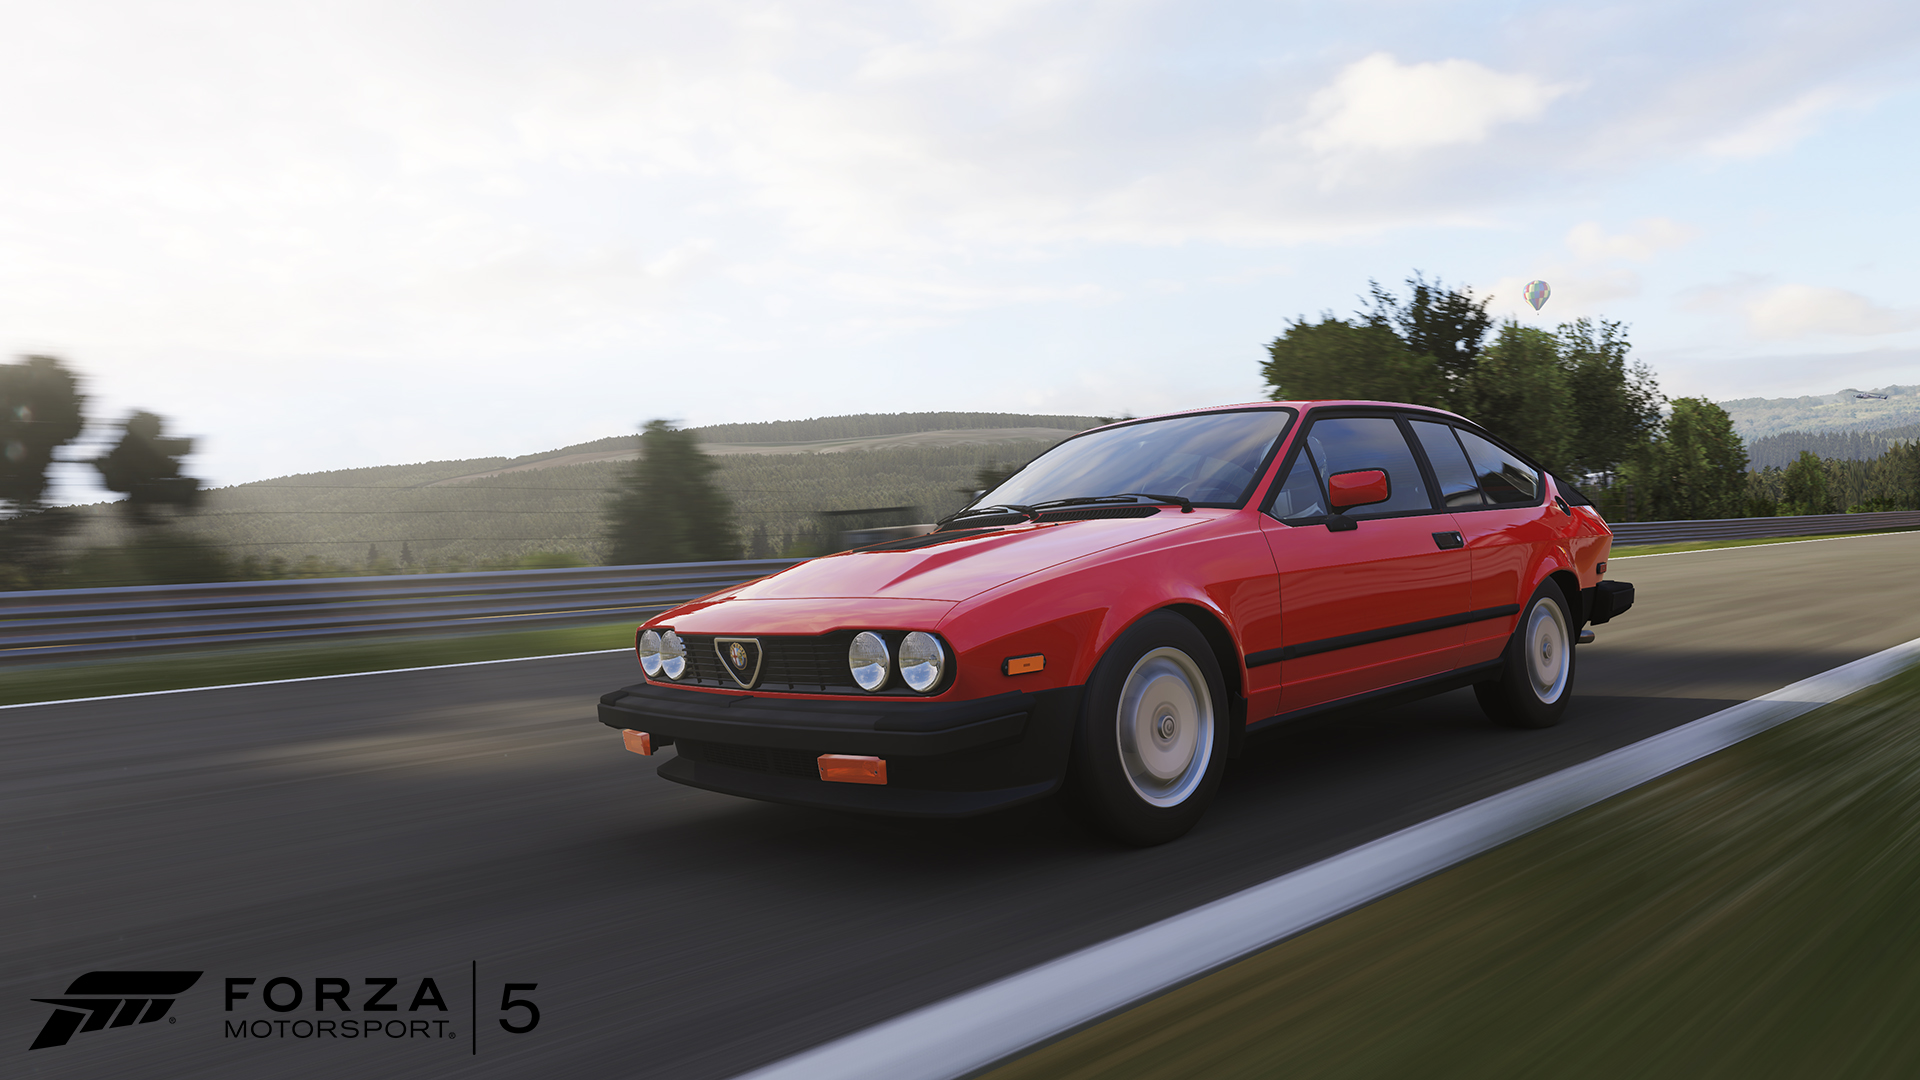 Forza Motorsport 5 Meguiar S Car Pack Now Available Xbox Wire